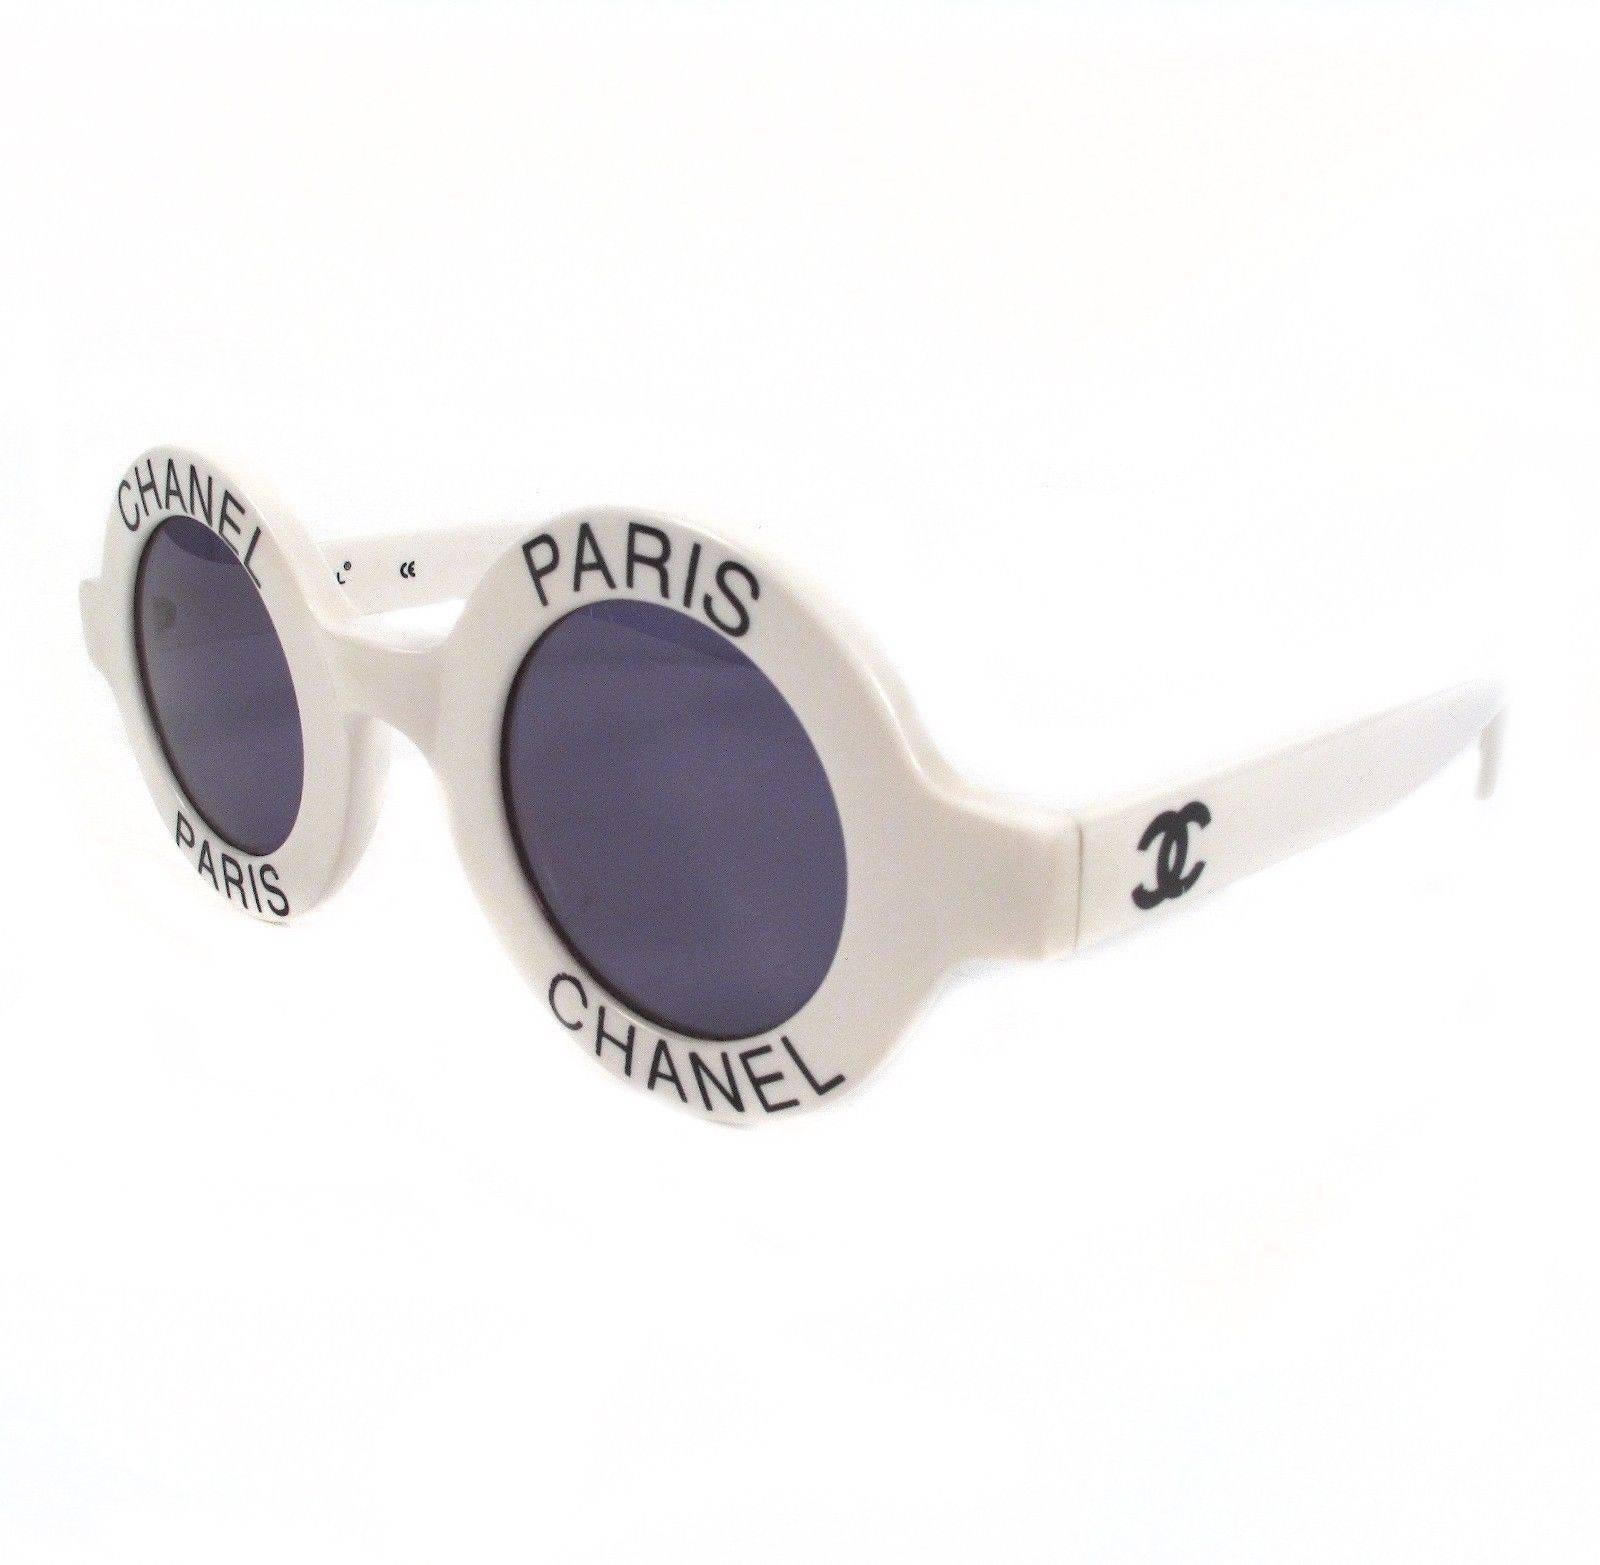 Chanel - Vintage White Round Logo Sunglasses

Color: White & Black

------------------------------------------------------------

Details:

- round frame lenses

- CC logos at temples

- item # AA1375

Condition: Great condition -